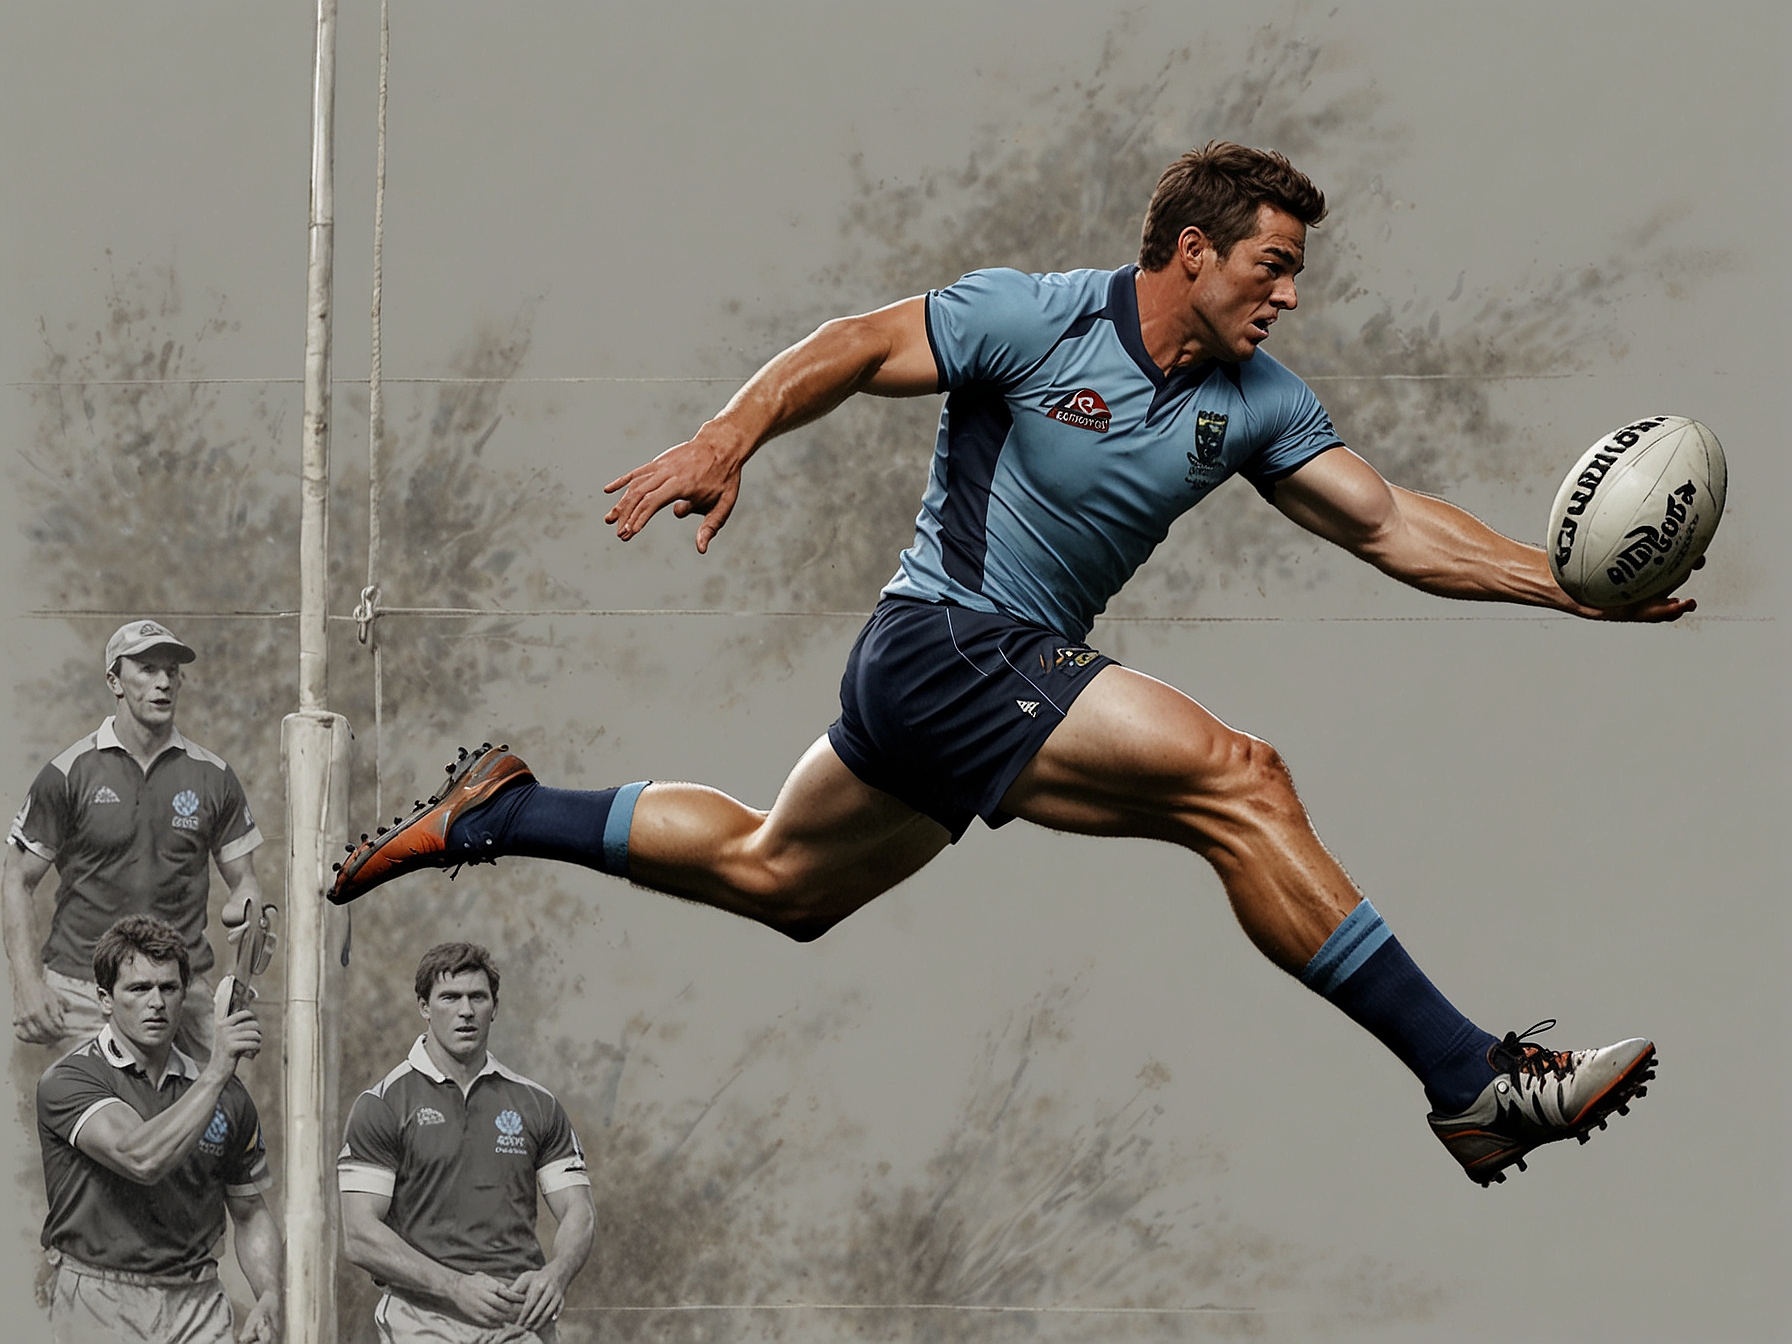 Stephen Crichton leaps high to secure a high ball, demonstrating his exceptional aerial prowess and agility, epitomizing his key role in both attack and defense for the NSW Blues.